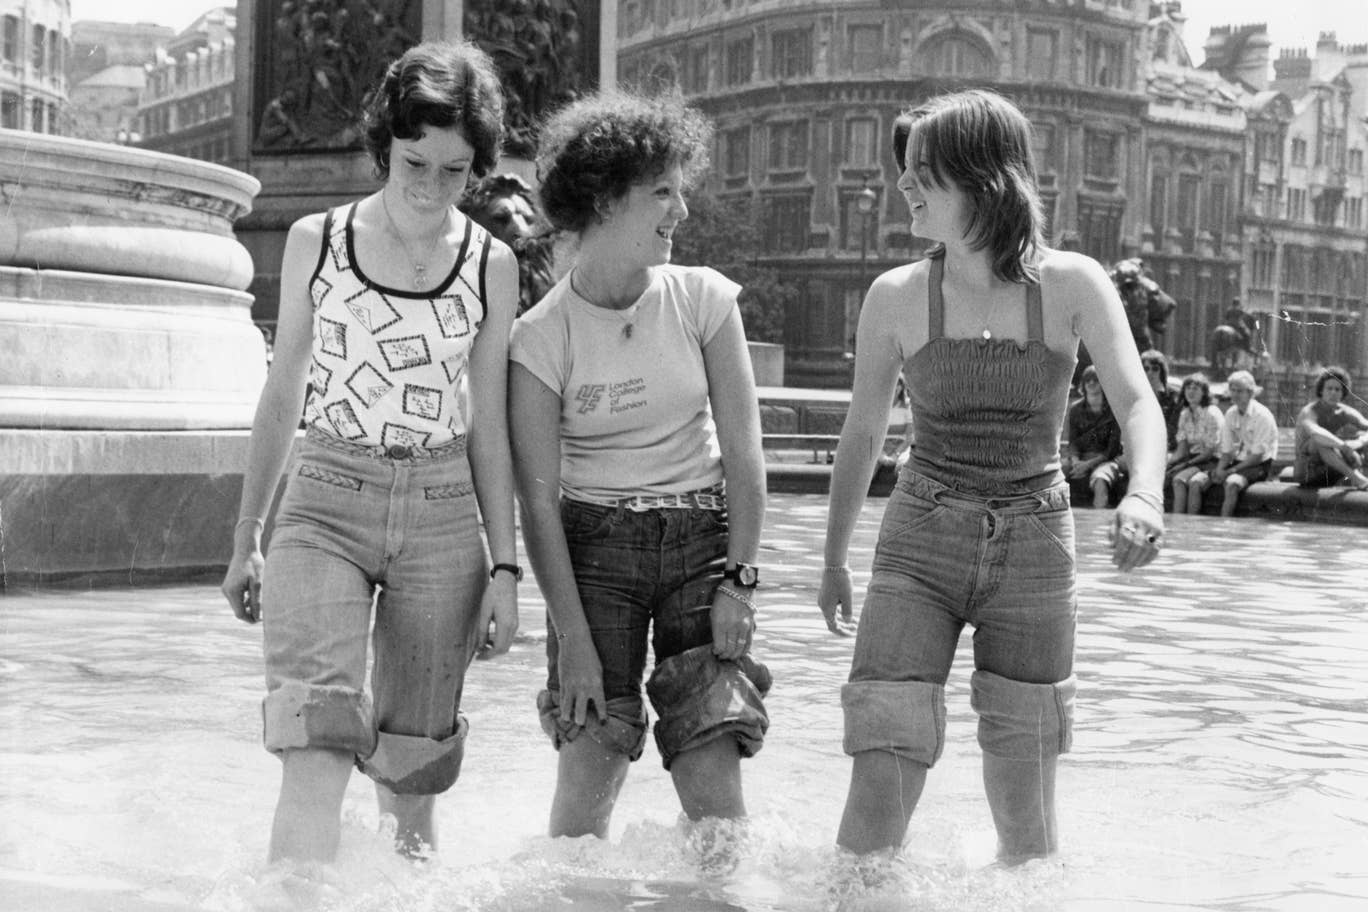 Cooling off in the fountains at Trafalgar Square